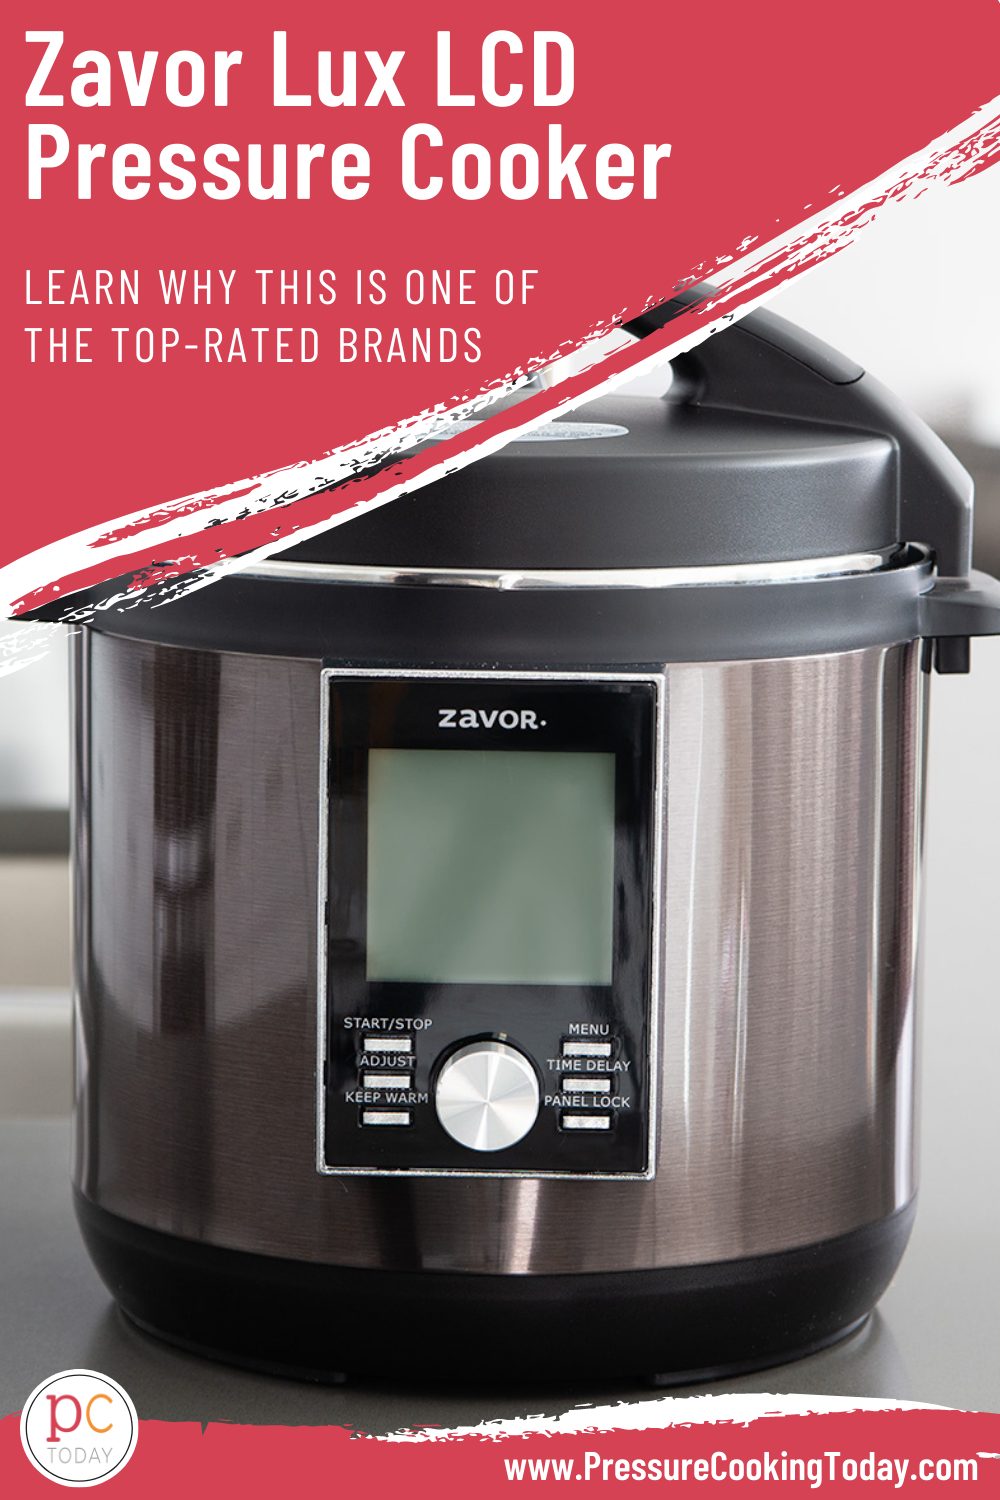 Read the full review for EVERYTHING you need to know about the Zavor Lux LCD—what you'll like, what you need to know before you buy, and how to get started using it! #PressureCookingToday #Review #Zavor via @PressureCook2da